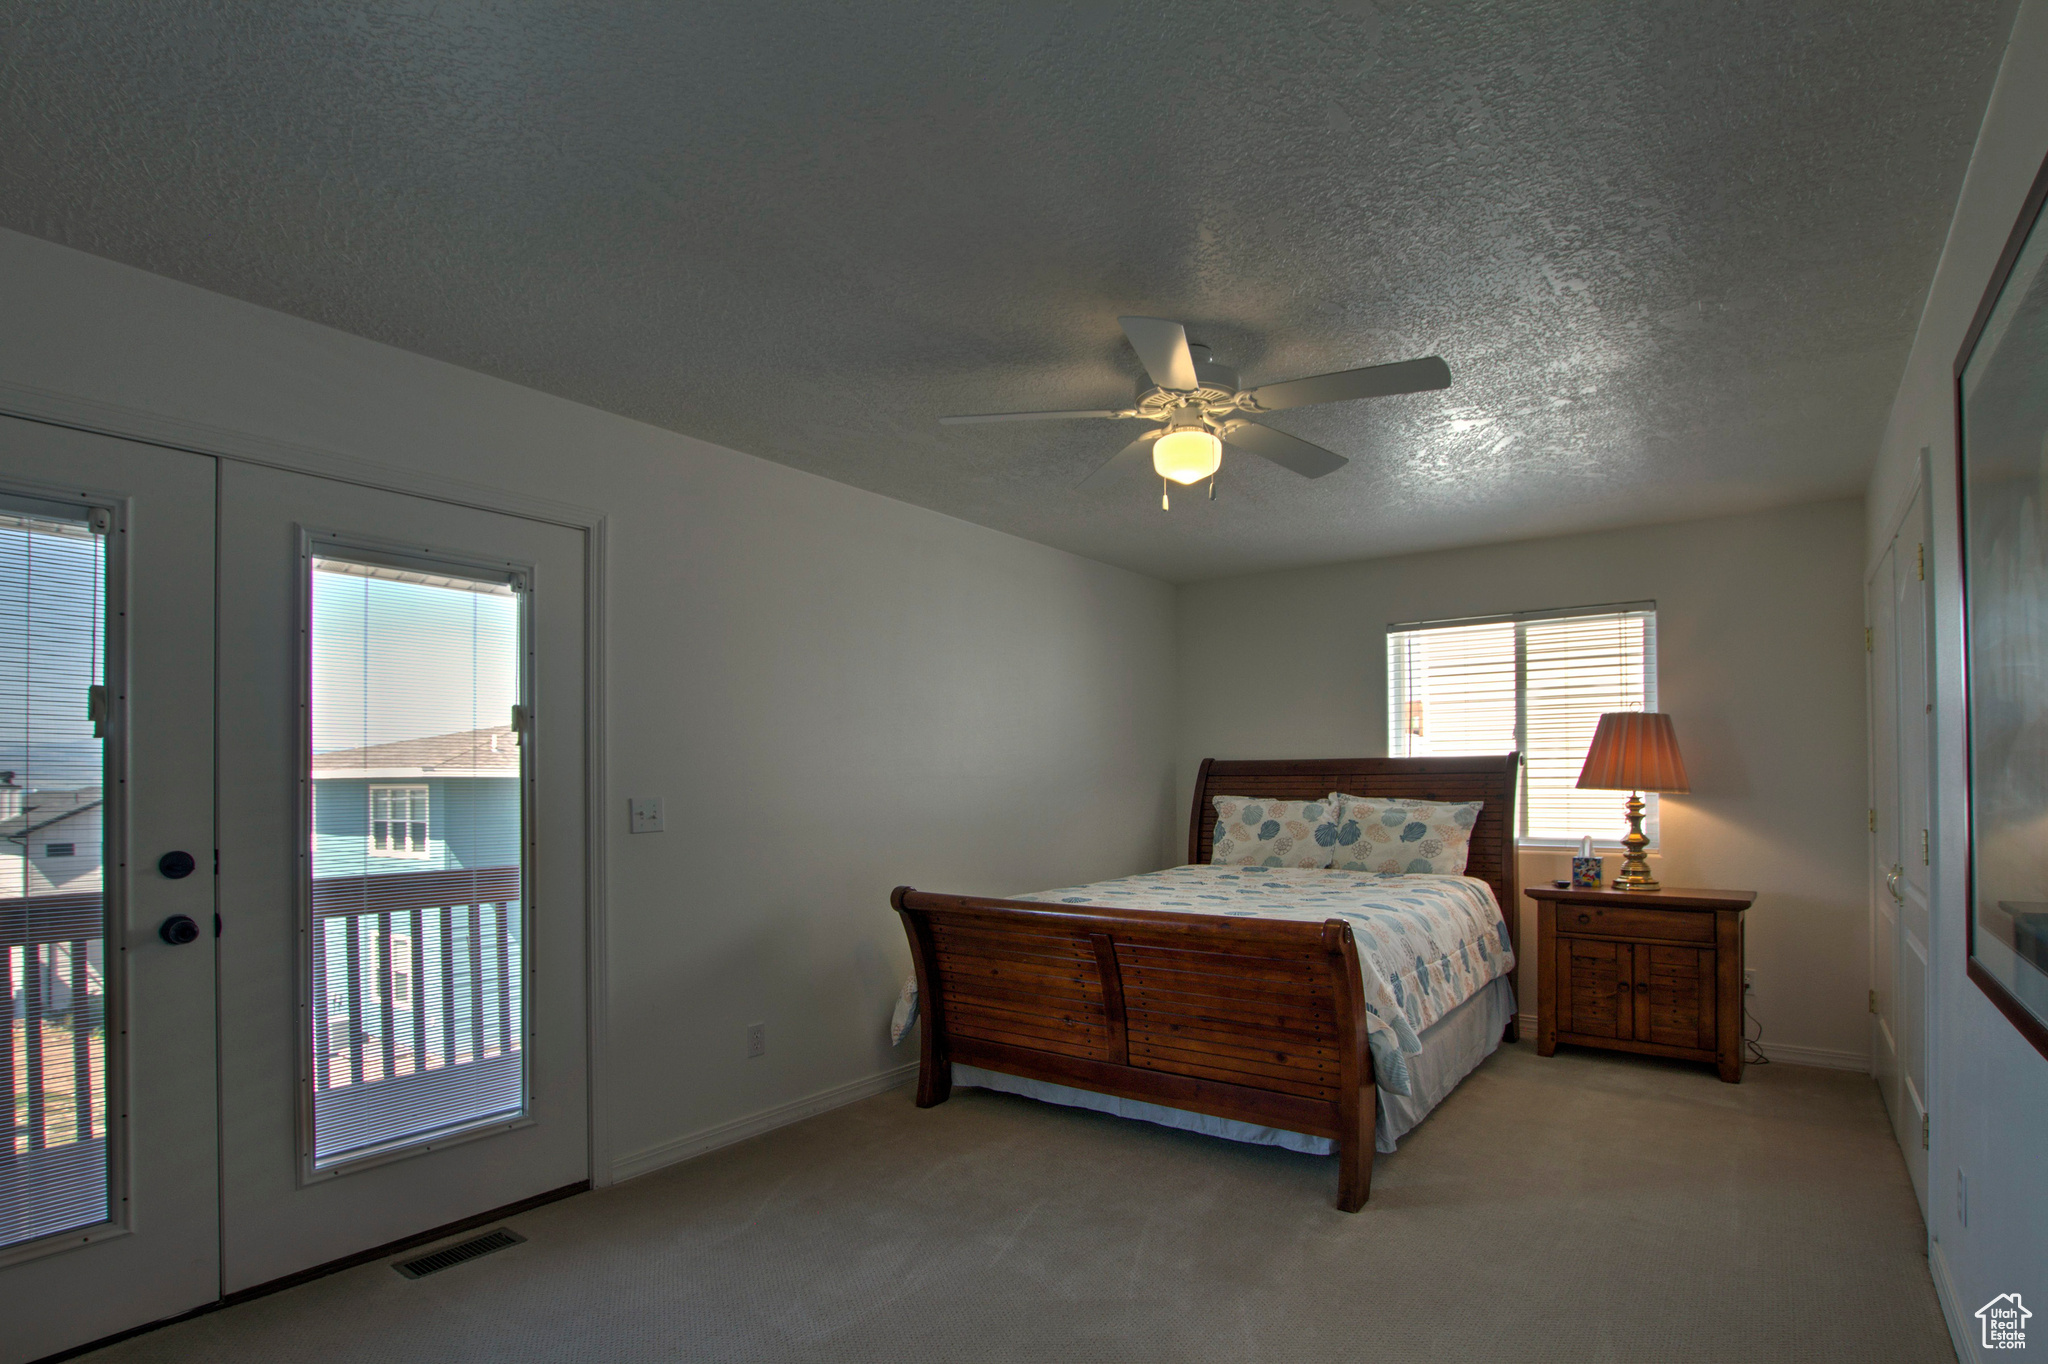 Bedroom featuring light colored carpet, french doors, ceiling fan, a textured ceiling, and access to exterior